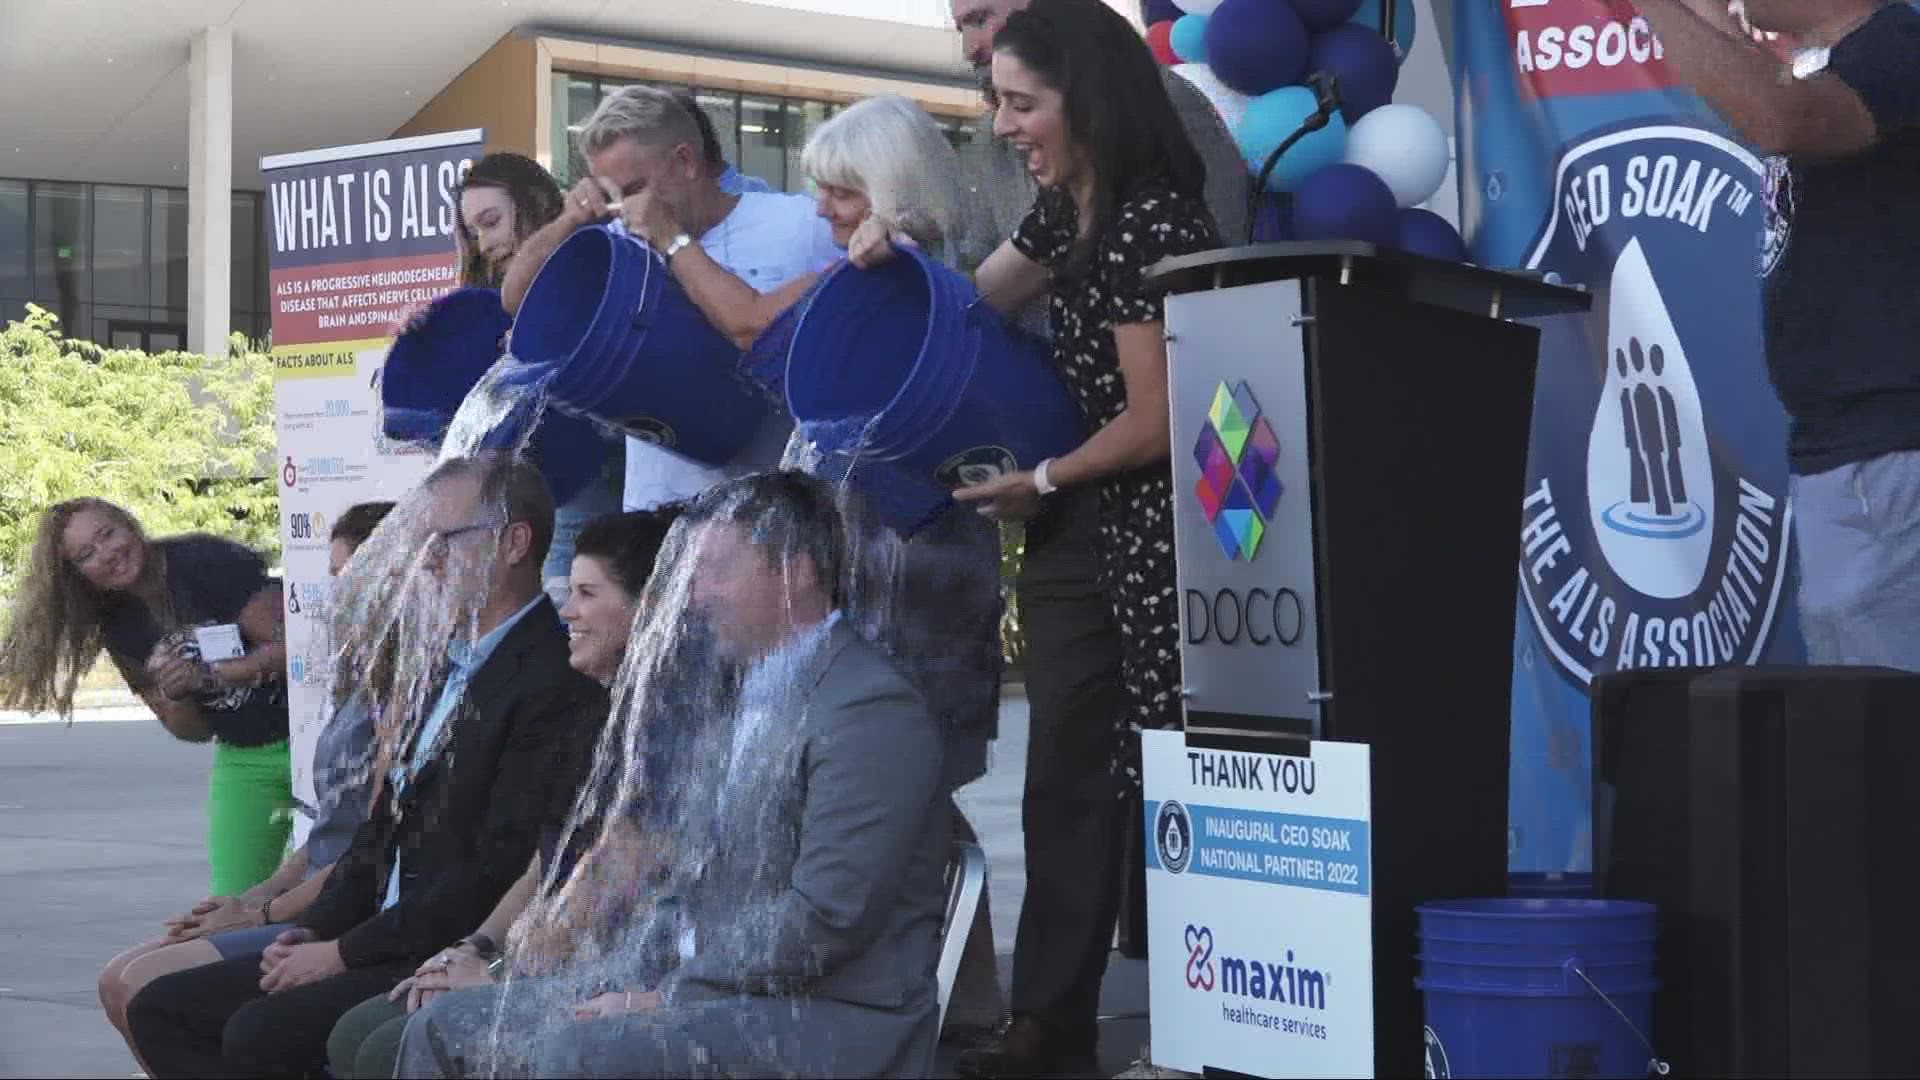 The "ice bucket challenge" back in 2014 brought about so much awareness that it became a viral sensation, raising a total of $115 million for research.